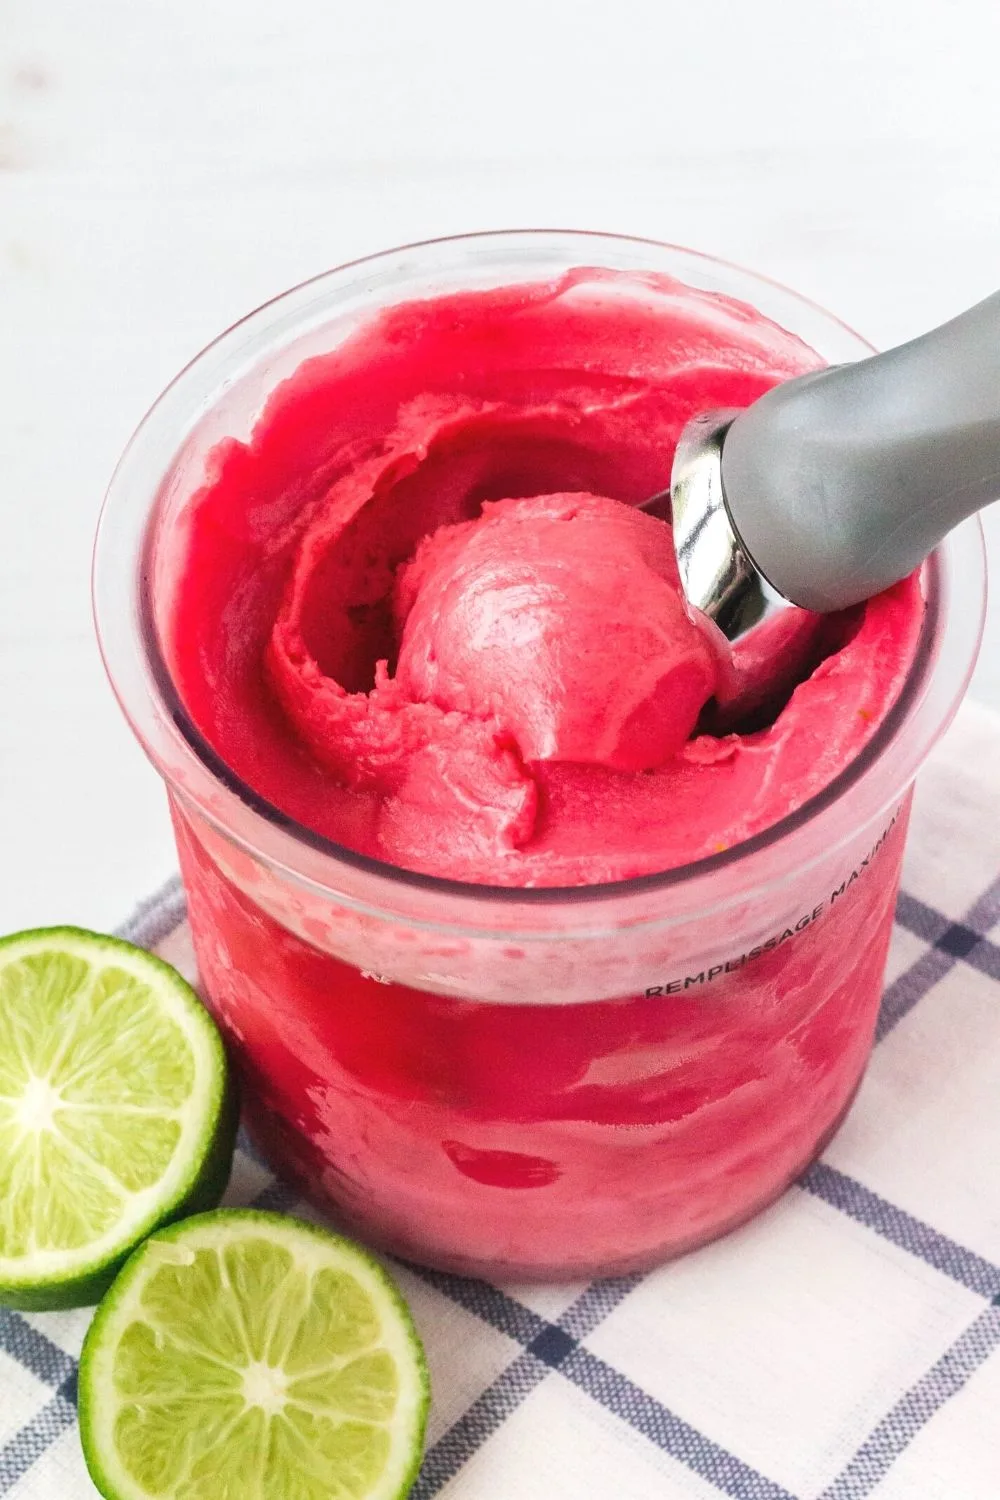 overhead view of a pint of cherry limeade sorbet made in the Ninja Creami machine